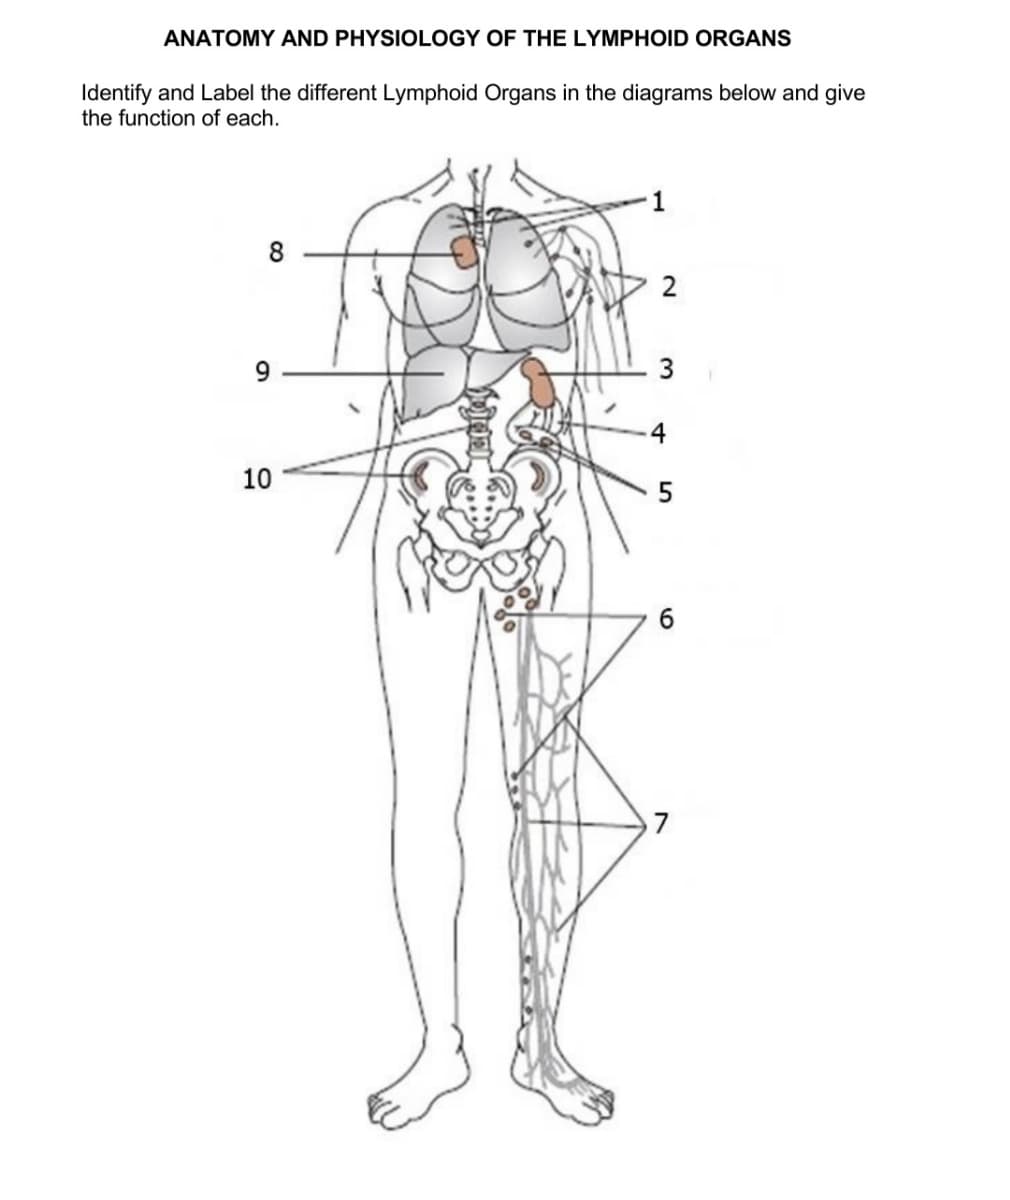 ANATOMY AND PHYSIOLOGY OF THE LYMPHOID ORGANS
Identify and Label the different Lymphoid Organs in the diagrams below and give
the function of each.
8
2
9.
-4
10
6
3.
